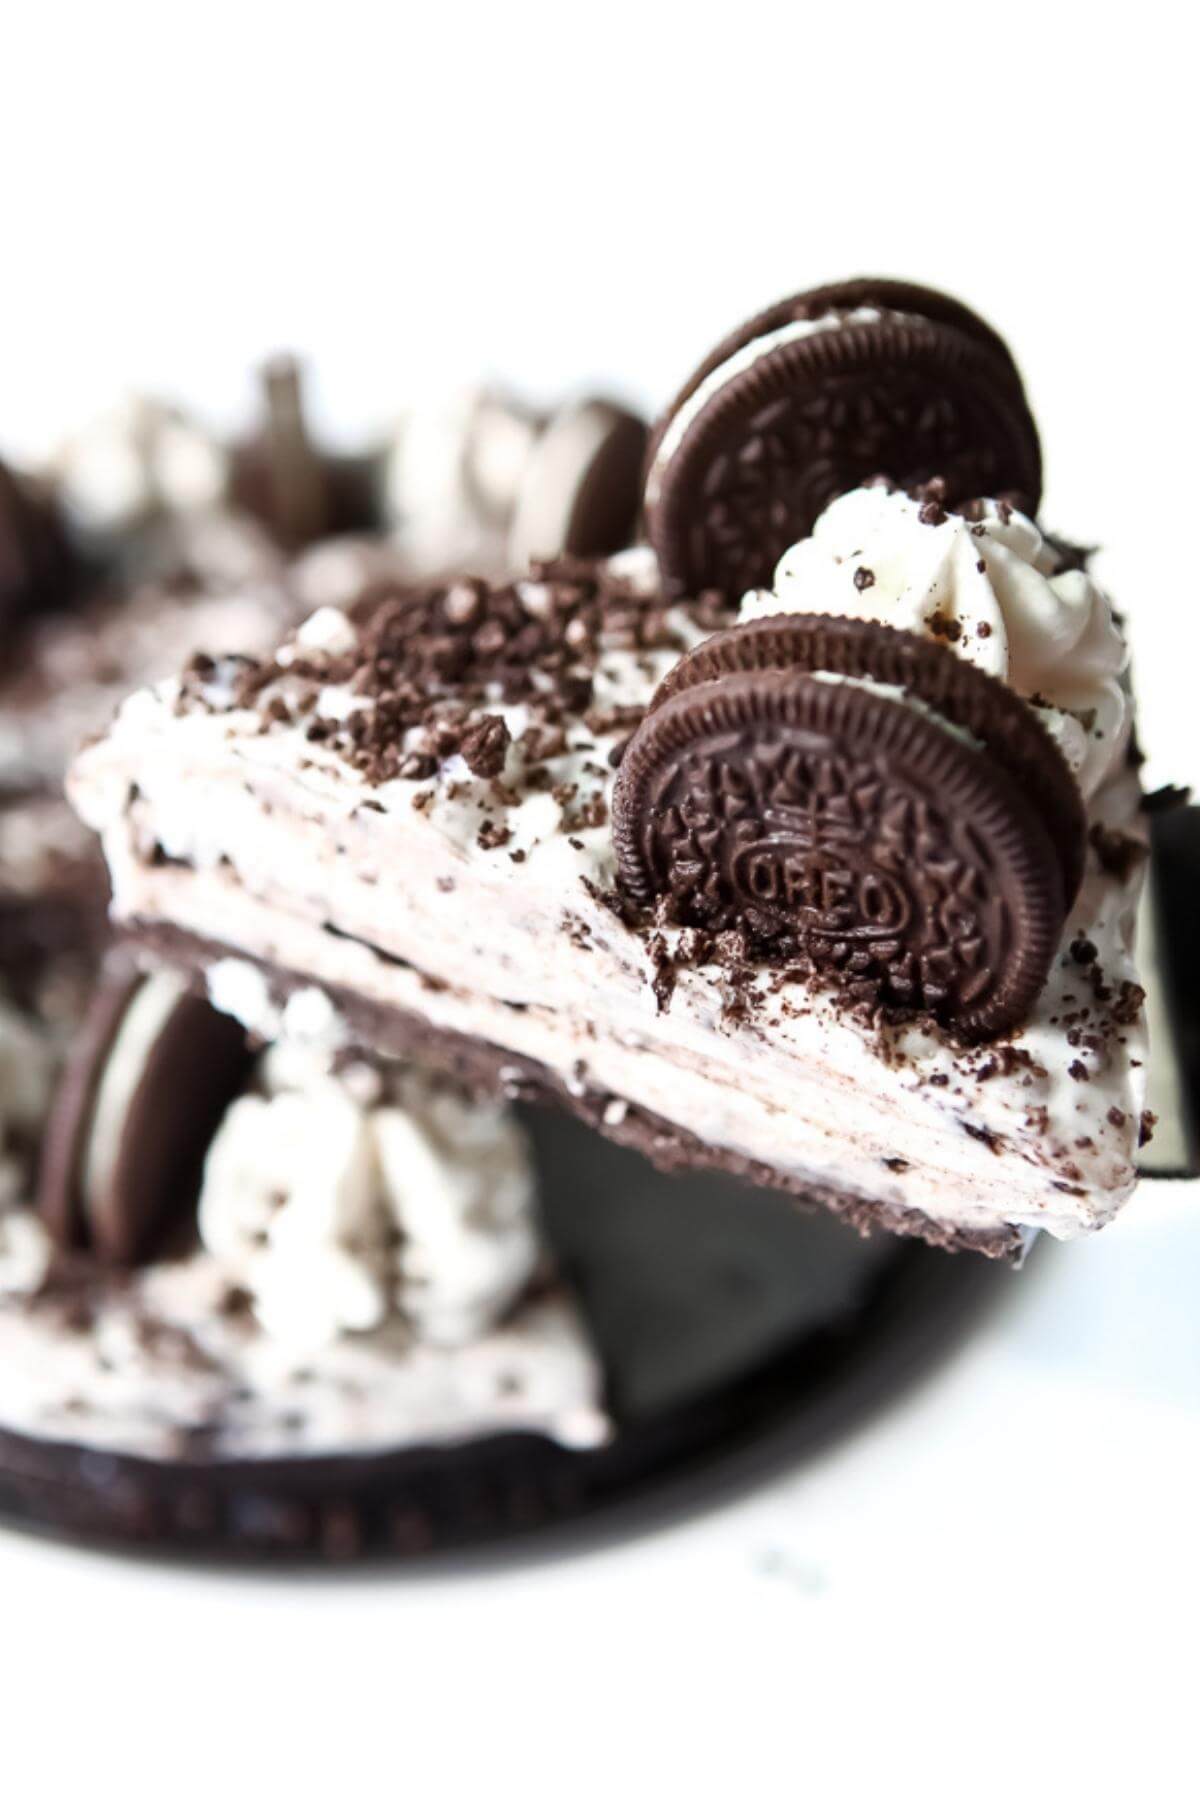 A vegan Oreo cheesecake with a slice being taken out of it.